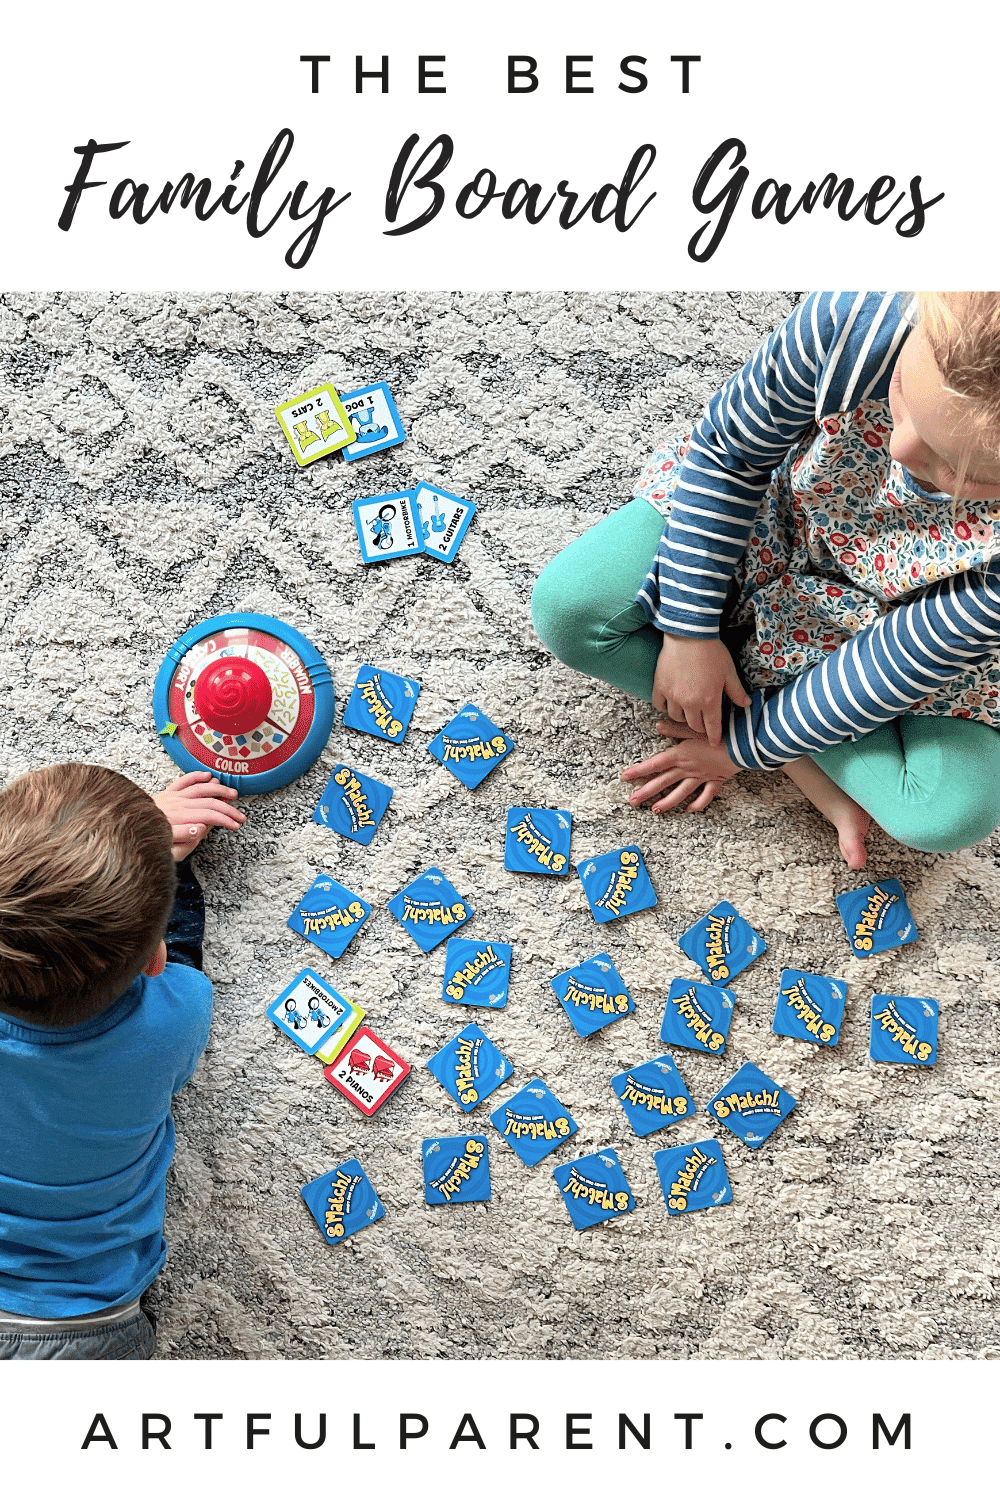 The BEST Family Board Games by Age